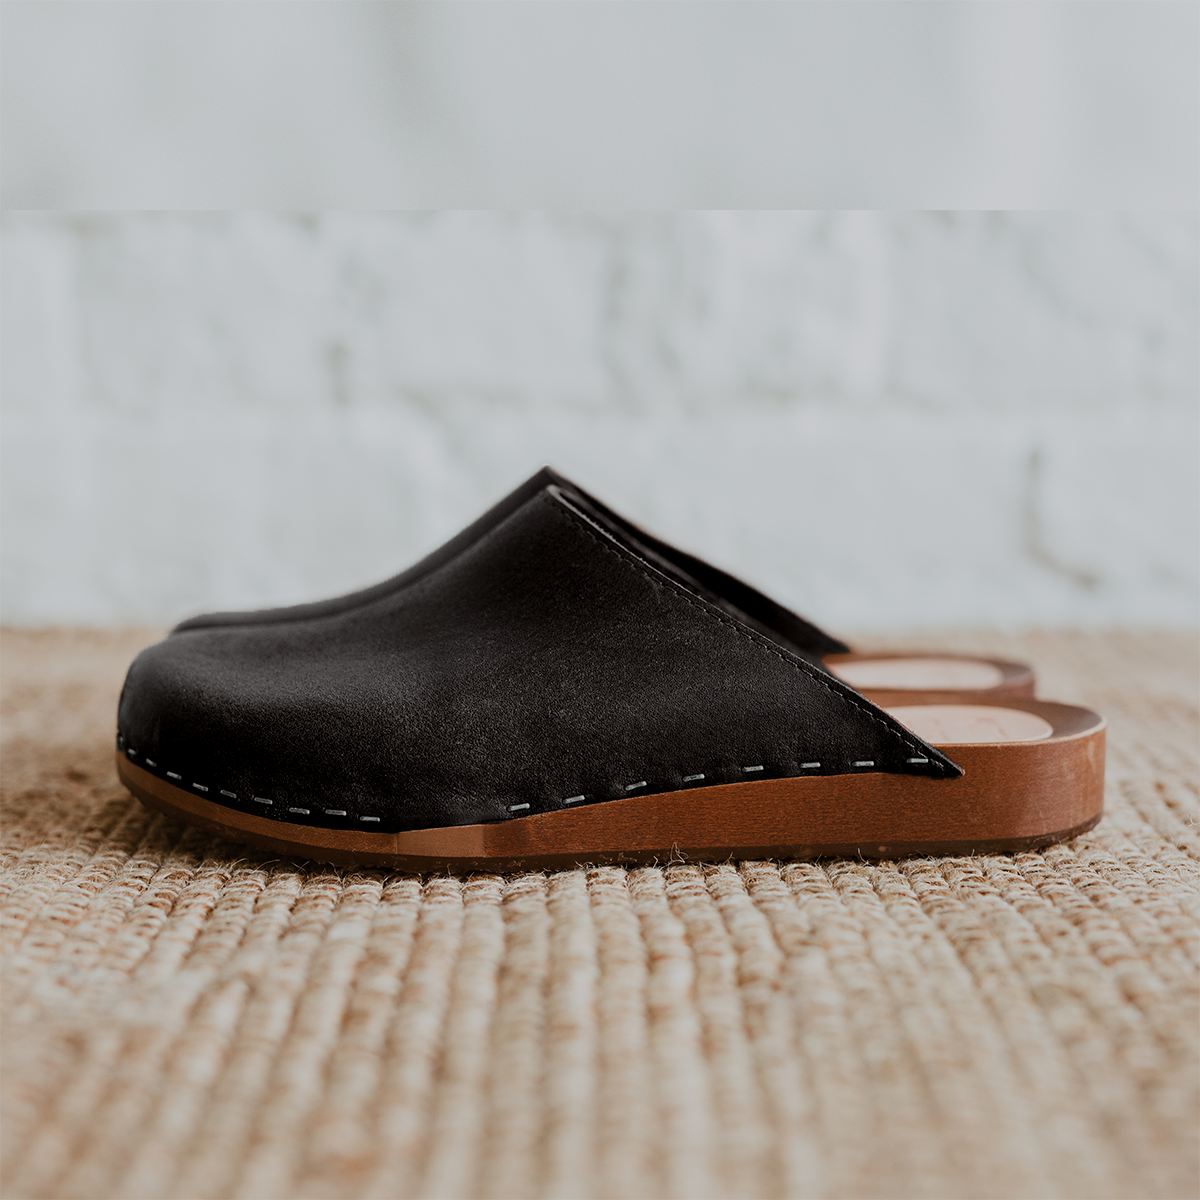 Black classic style swedish clog mule with flexible wooden base